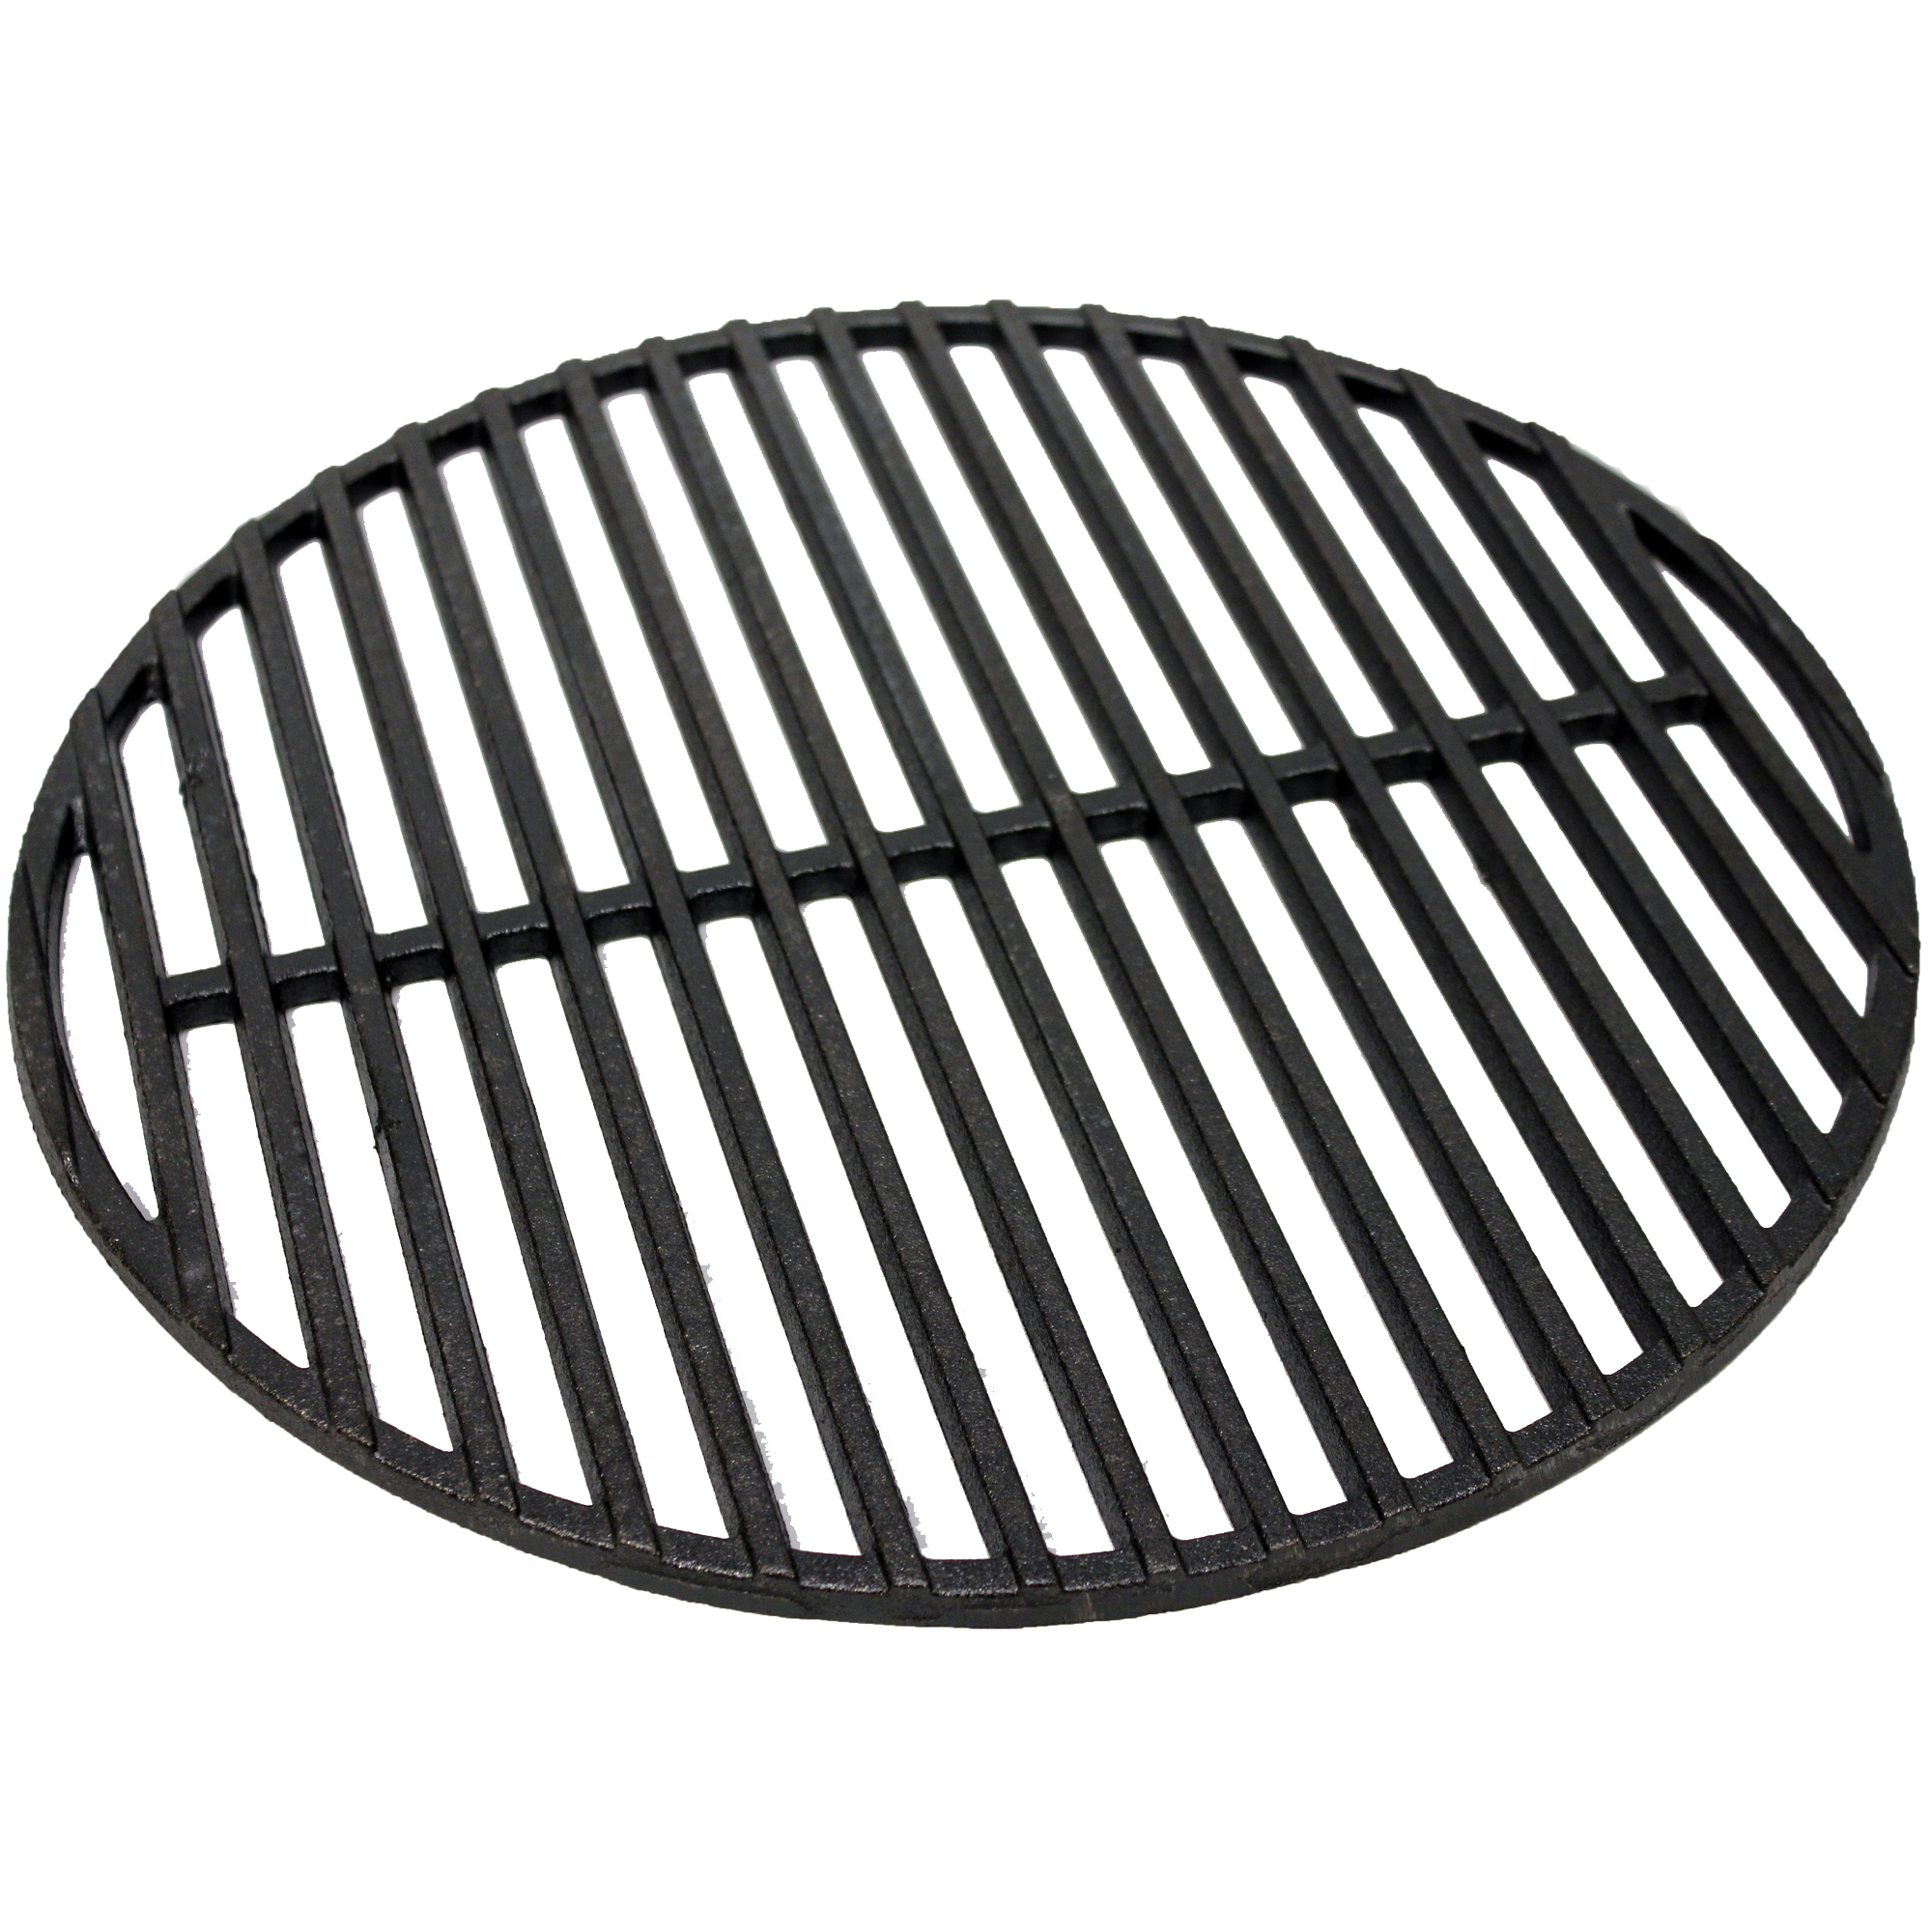 Kamado Grill - Cast Iron Cooking Grill 23 inch (410-CCG-23)